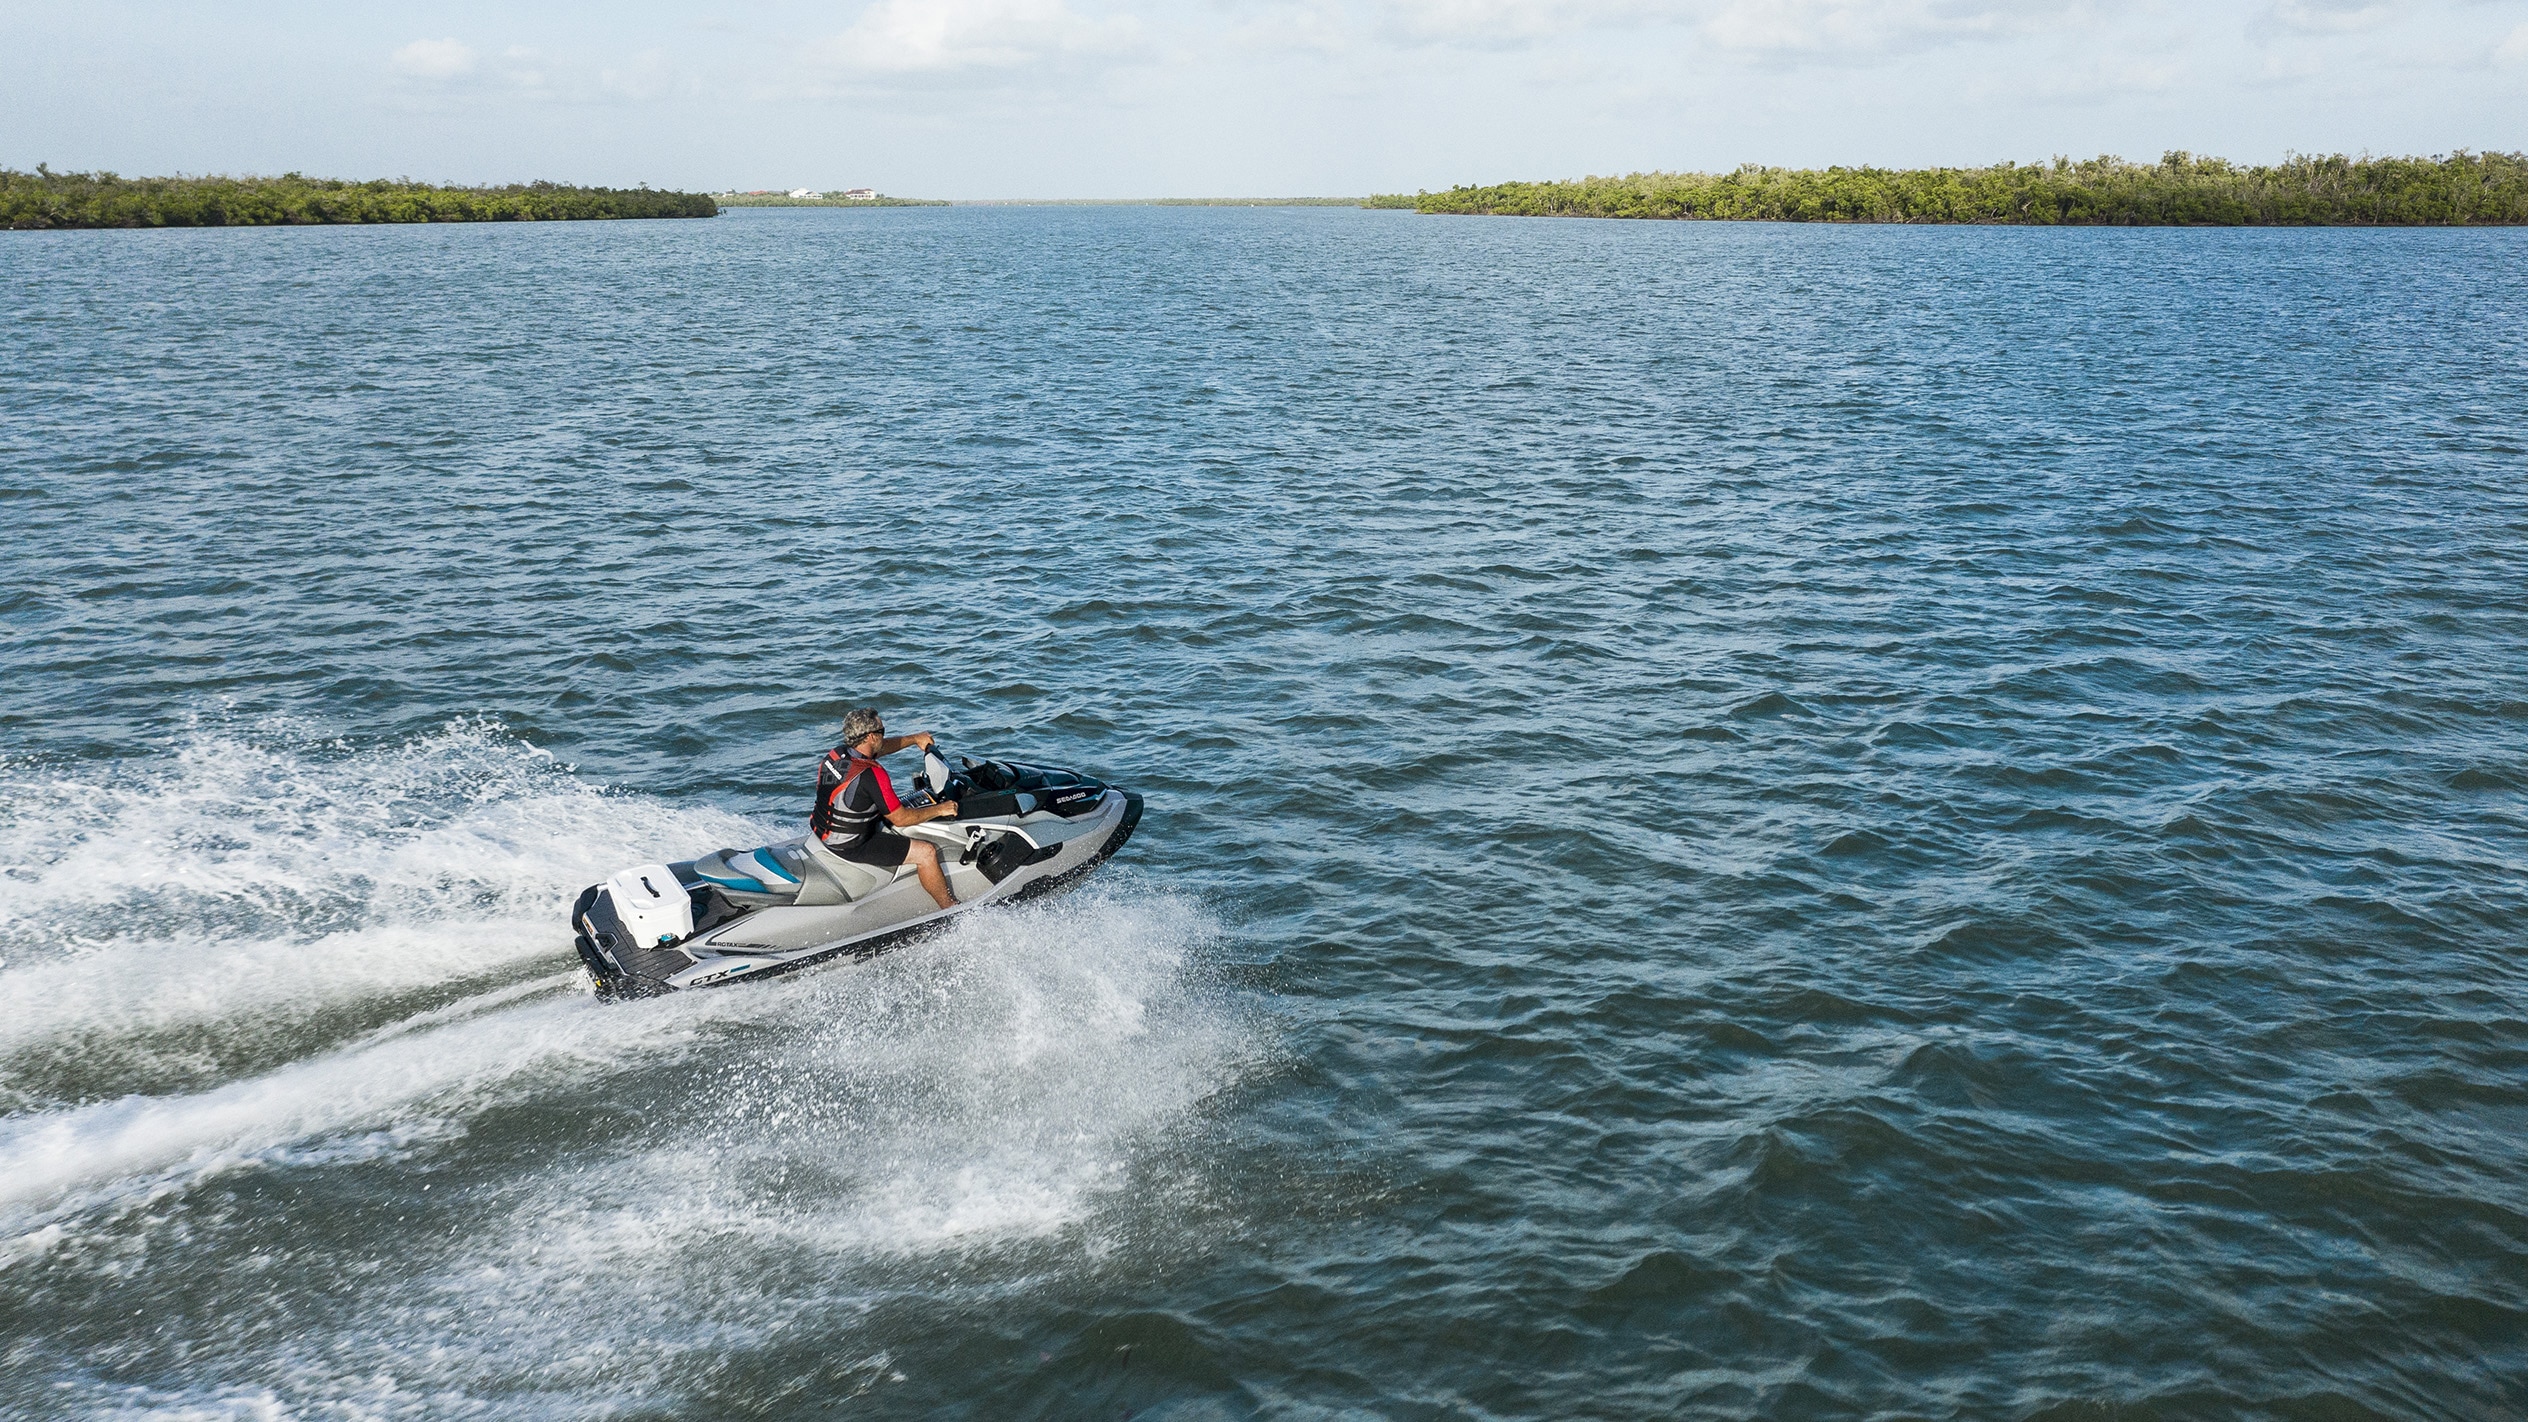 Sea-Doo GTX stable hull feature